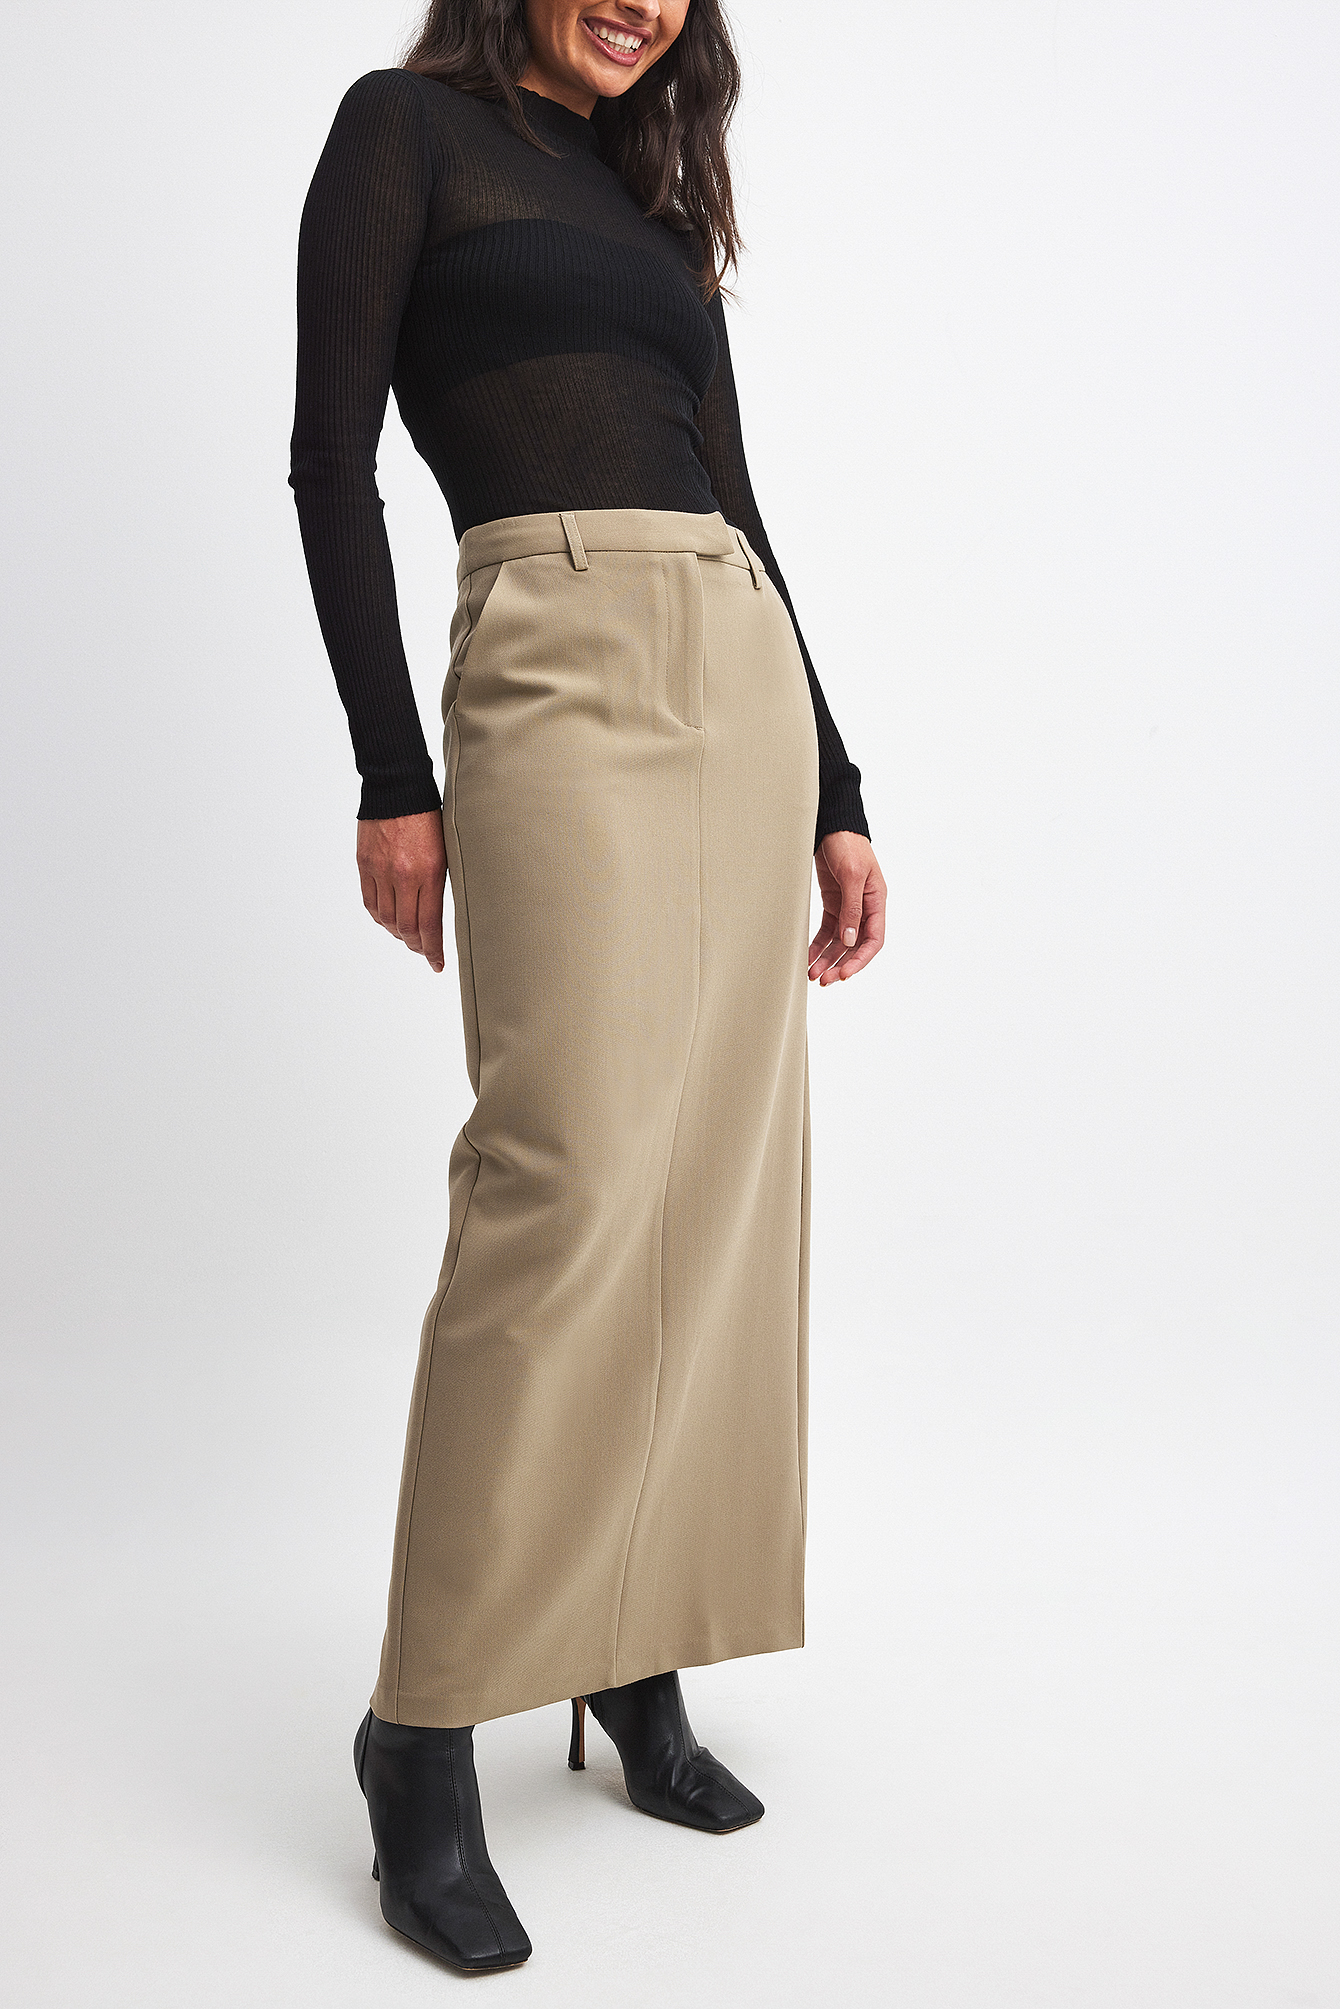 Maxi Skirts, Long Skirts For Women's